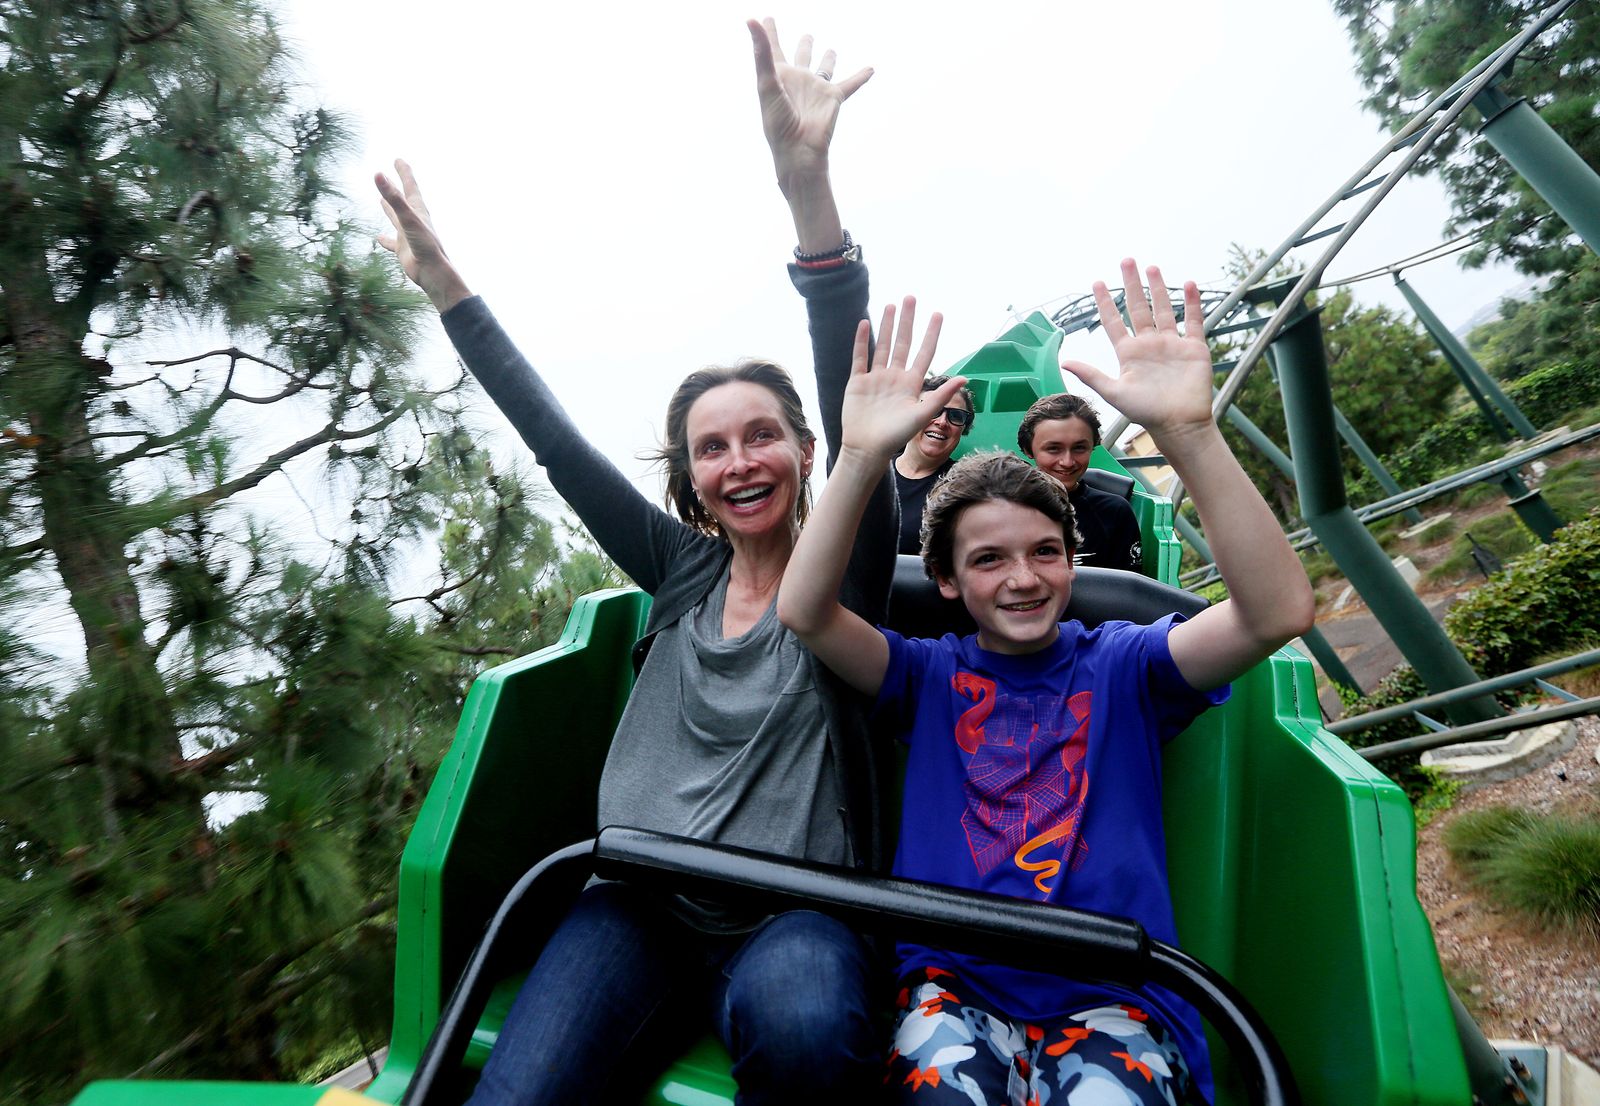 Calista and Liam Flockhart ride a rollercoaster at Legoland California on August 24, 2012, in Carlsbad, California. | Source: Sandy Huffaker/Corbis/Getty Images